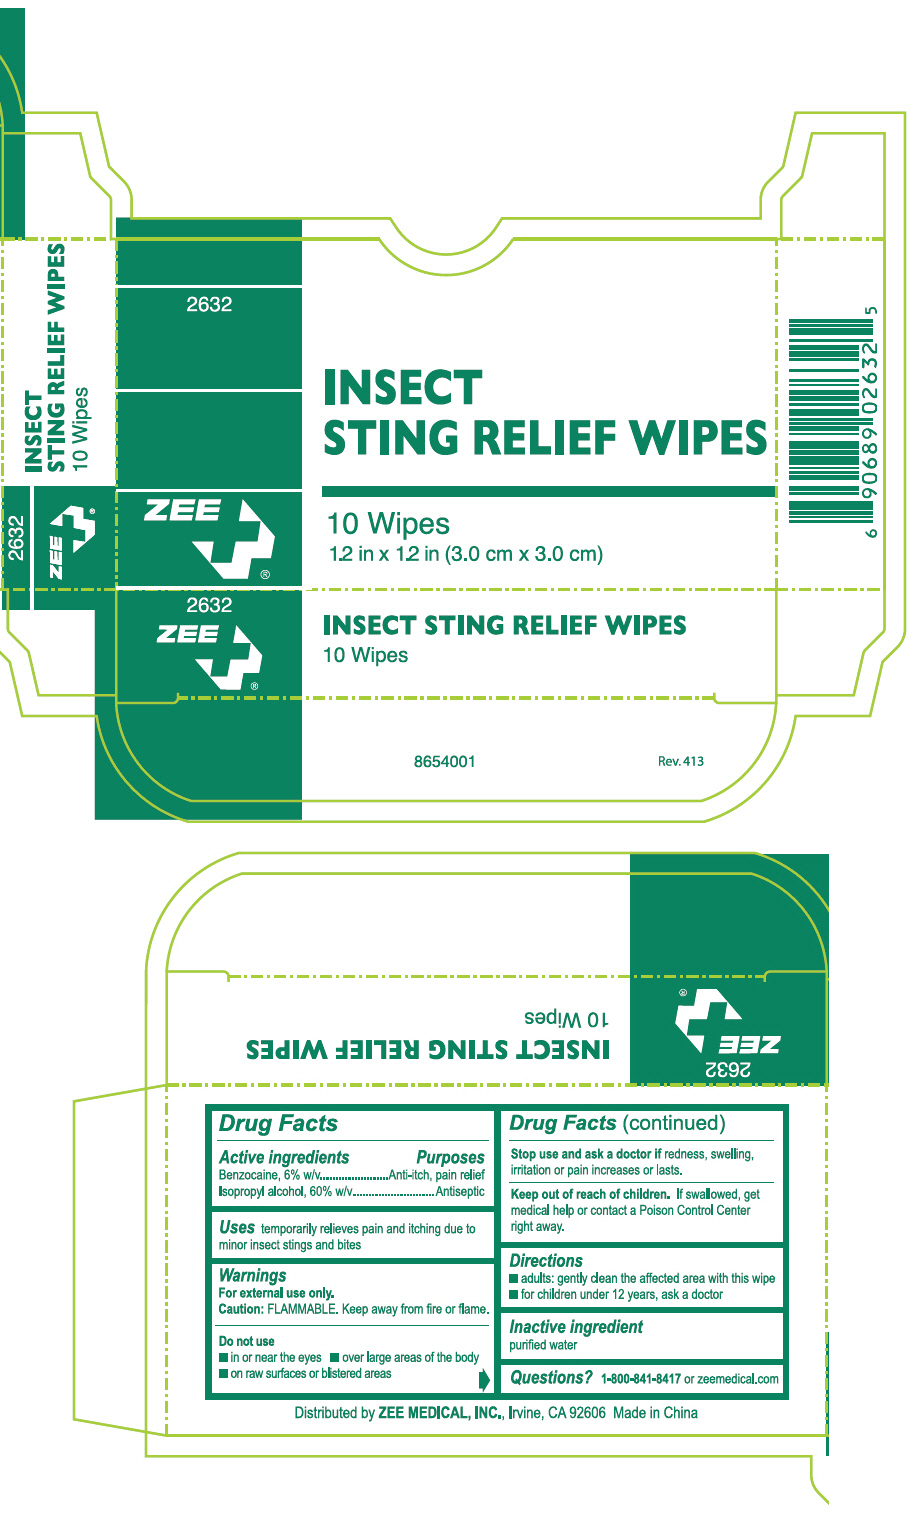 Insect Sting Relief Wipes | Benzocaine, Isopropyl Alcohol Swab while Breastfeeding